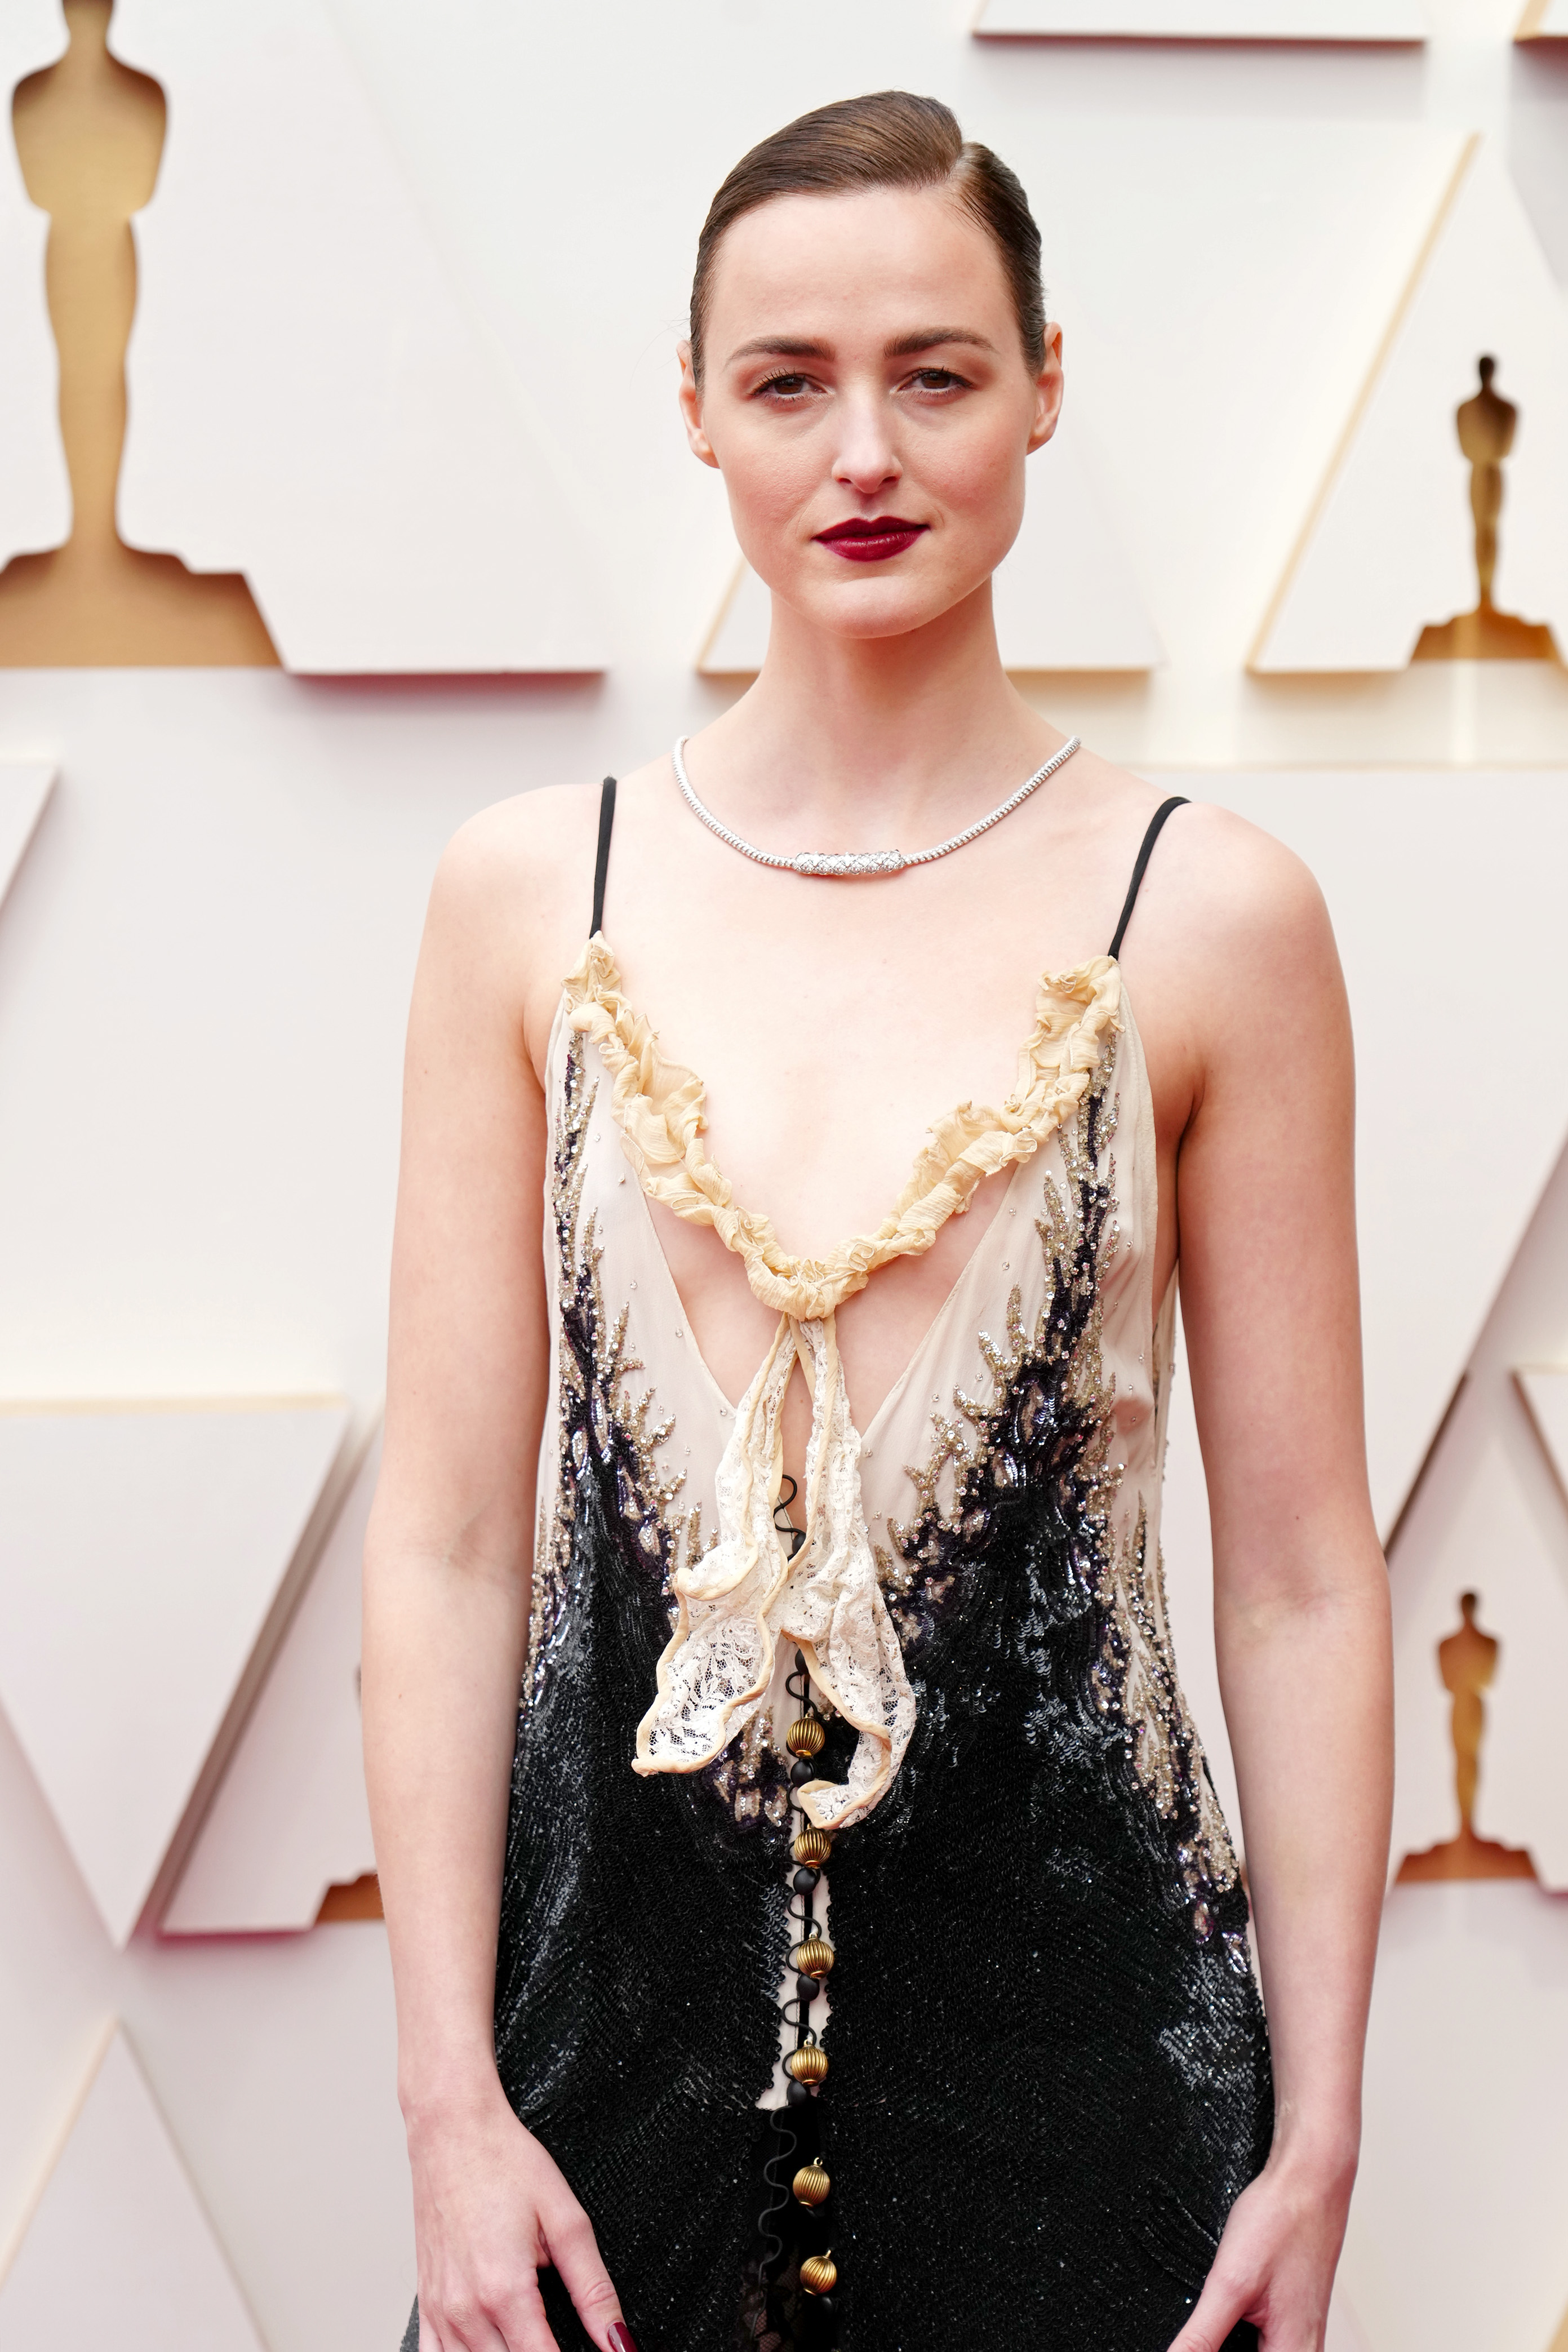 Louis Vuitton Embroidered Velvet Dress worn by Renate Reinsve on the Oscars  Red Carpet on March 27, 2022